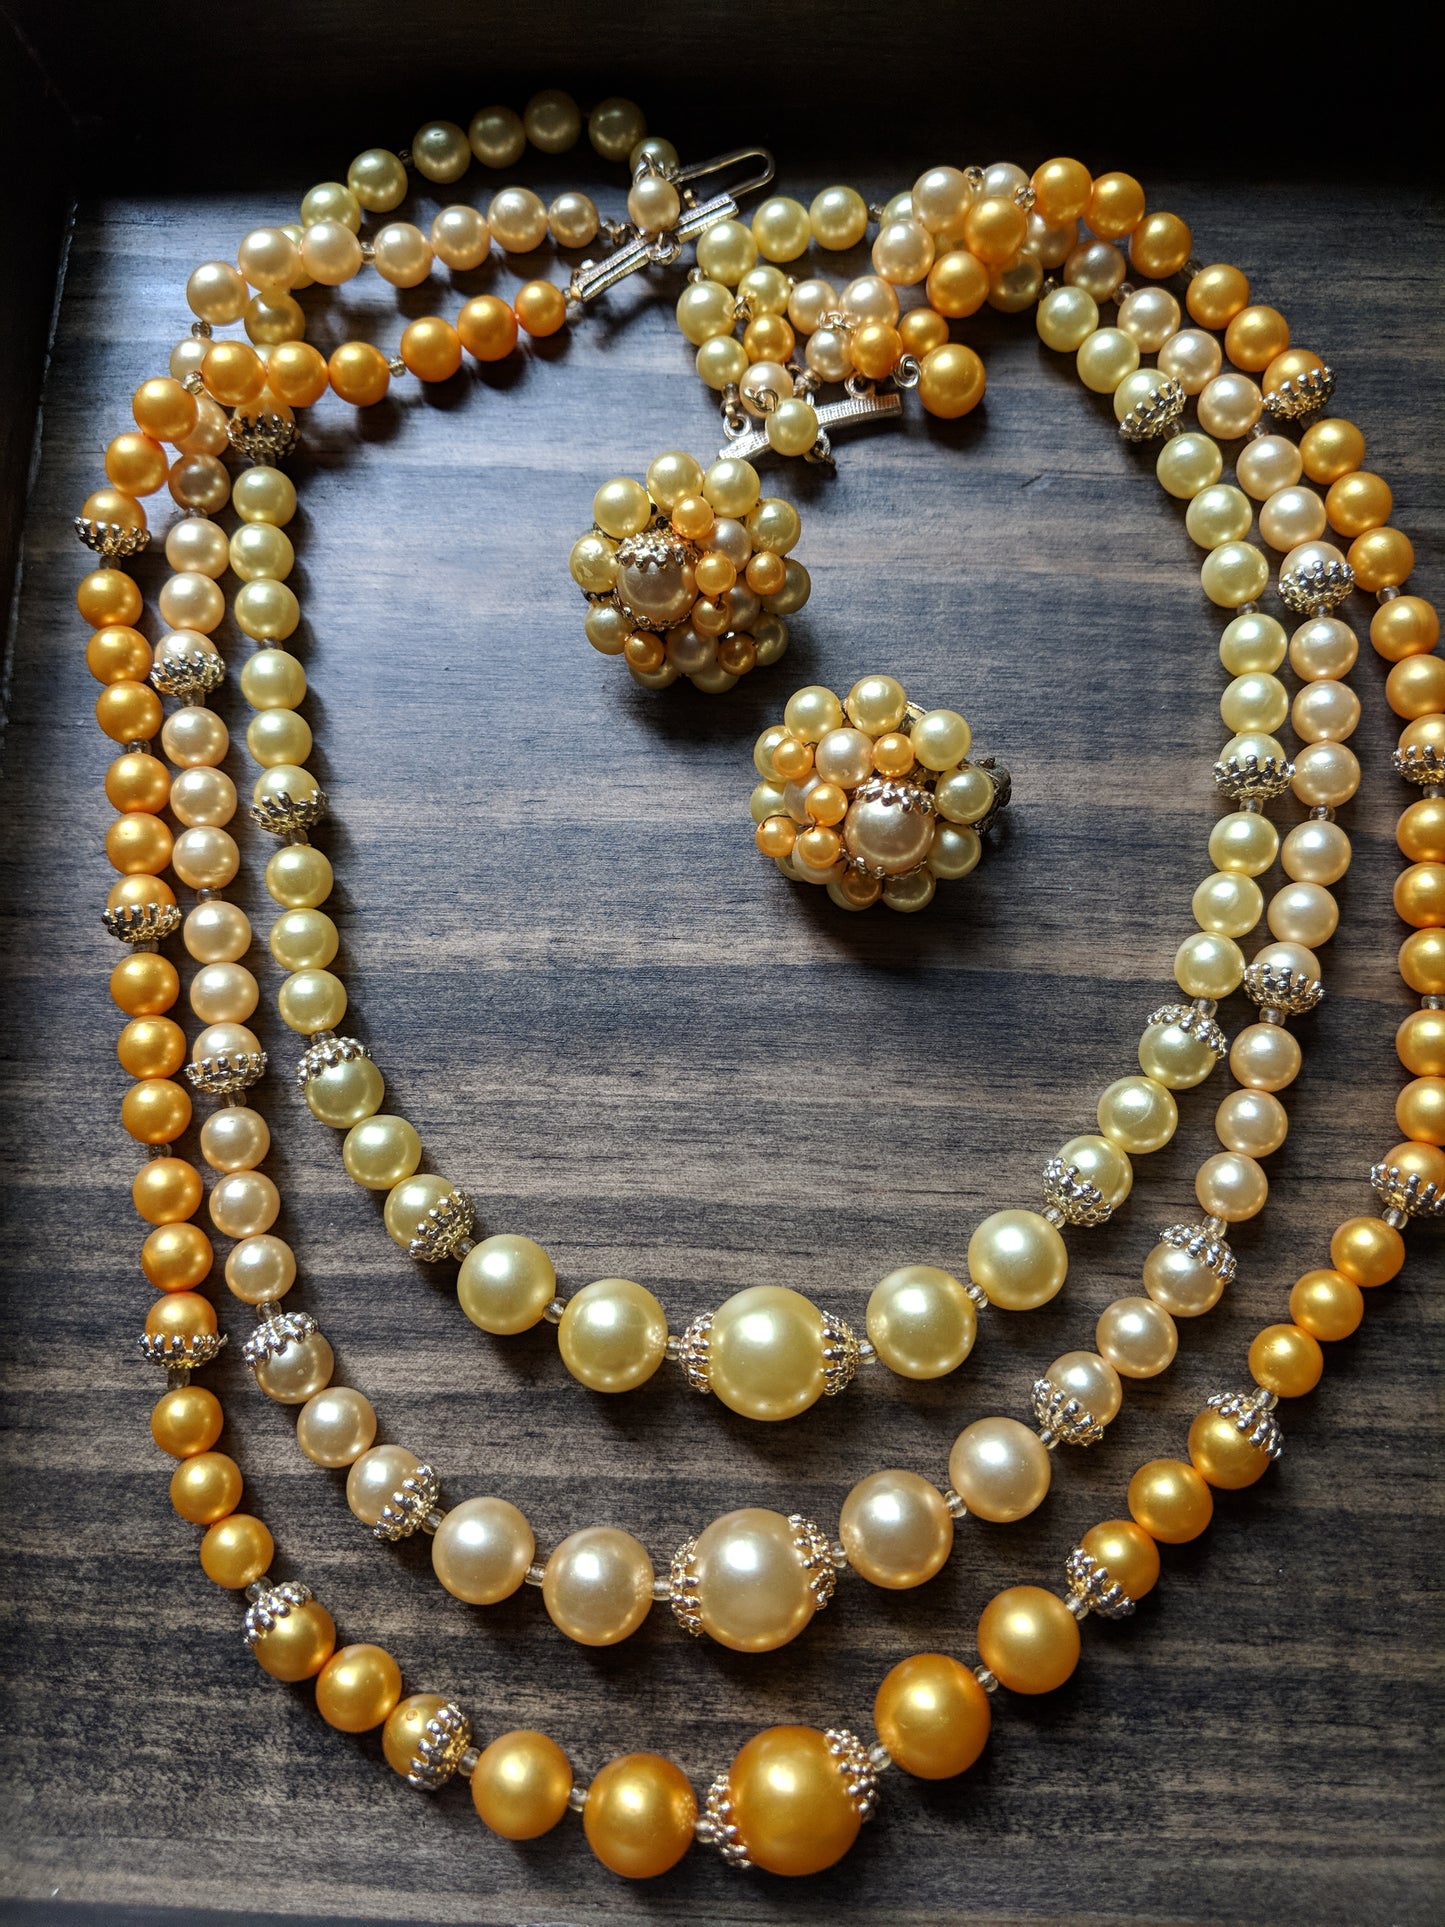 Vintage 50s 60s Multi Strand Necklace and Cluster Earrings Warm Yellow and Gold Tones